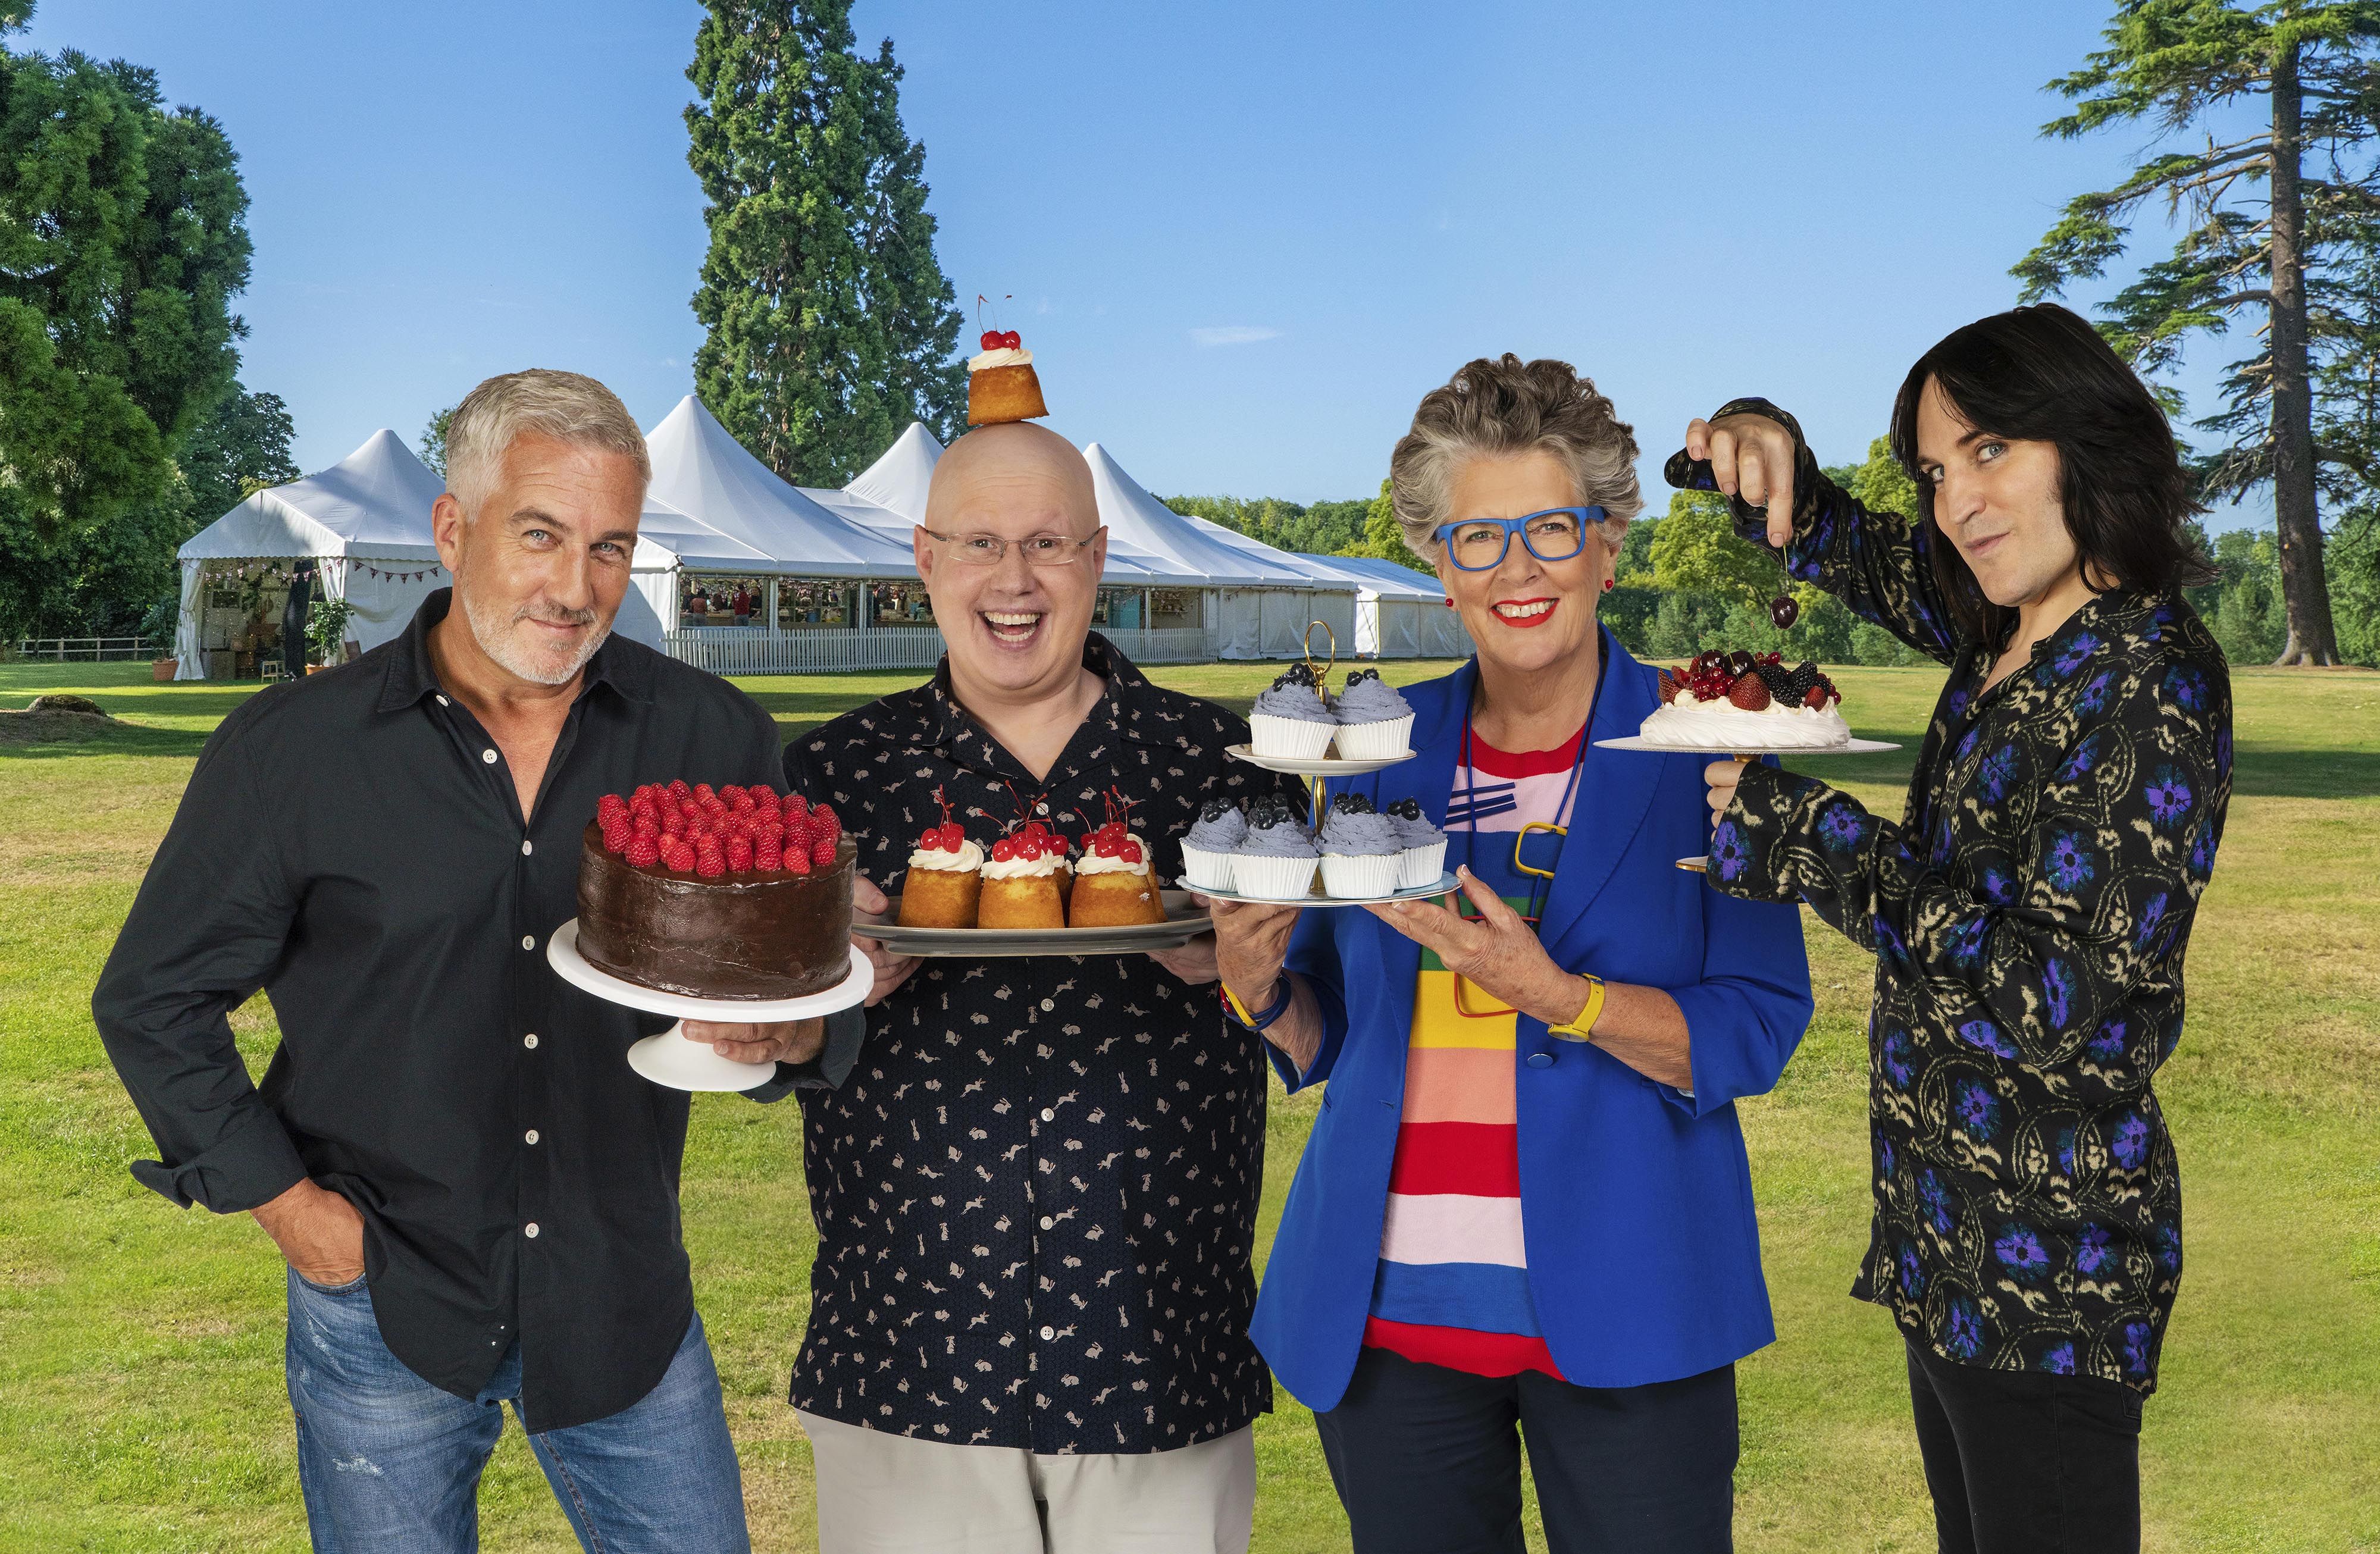 The Great British Bake Off 2020 - news, cast and air date